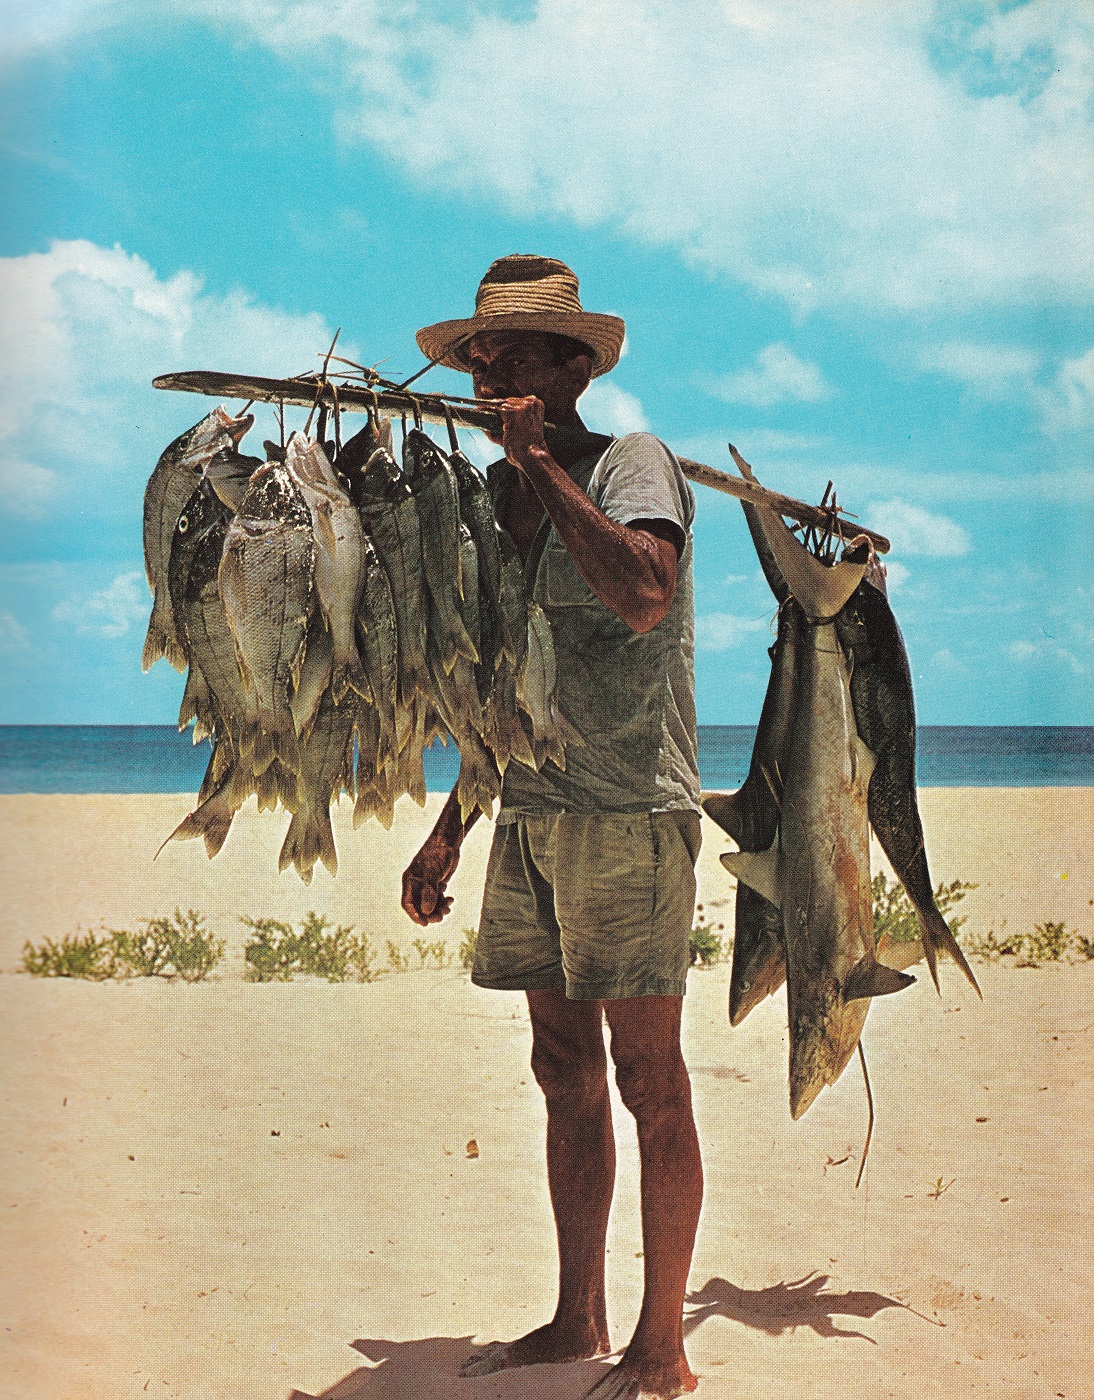 https://upload.wikimedia.org/wikipedia/commons/6/6d/Fisherman_and_his_catch_Seychelles.jpg